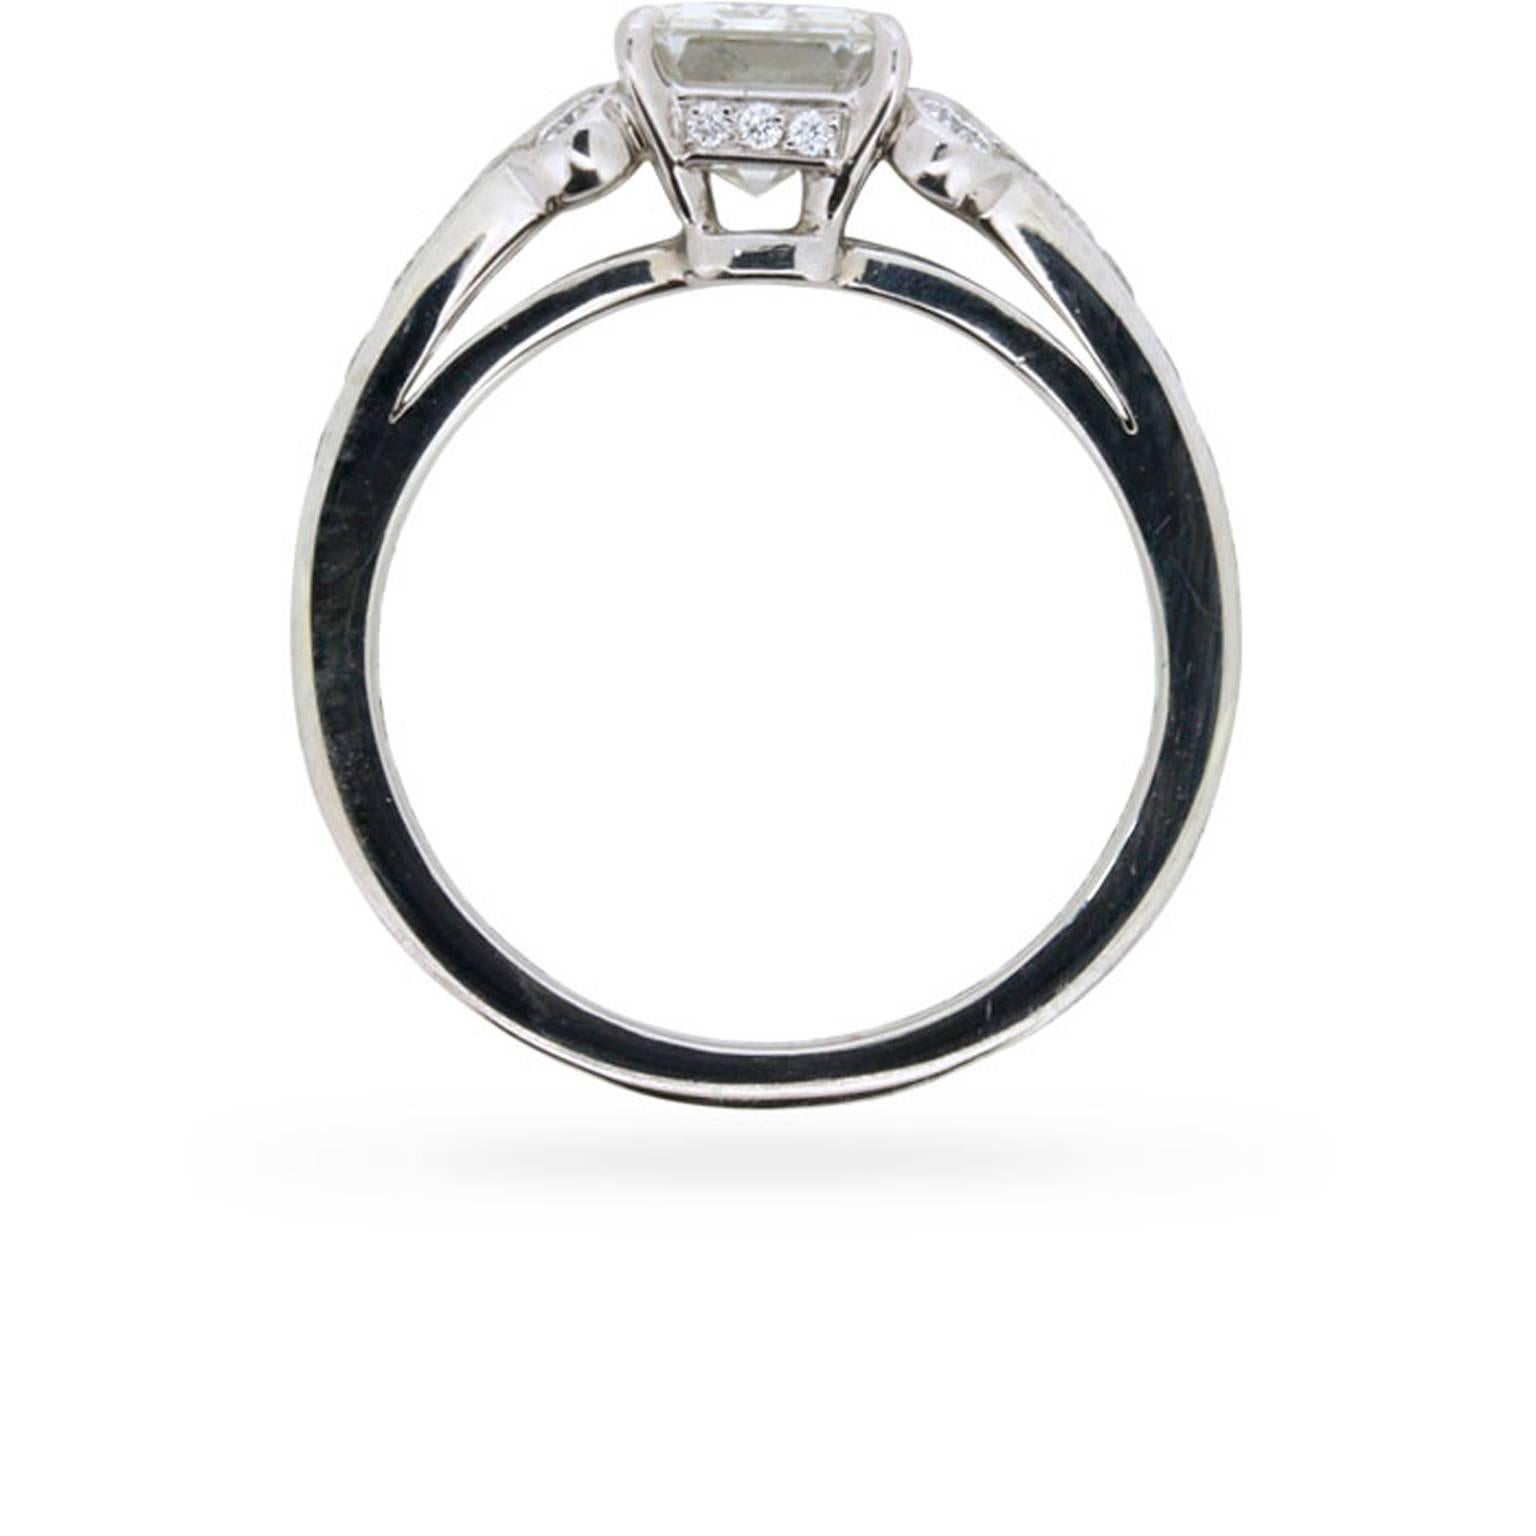 A 1.51 carat emerald cut diamond of exquisite quality is lavishly presented in the world-renowned French jeweller Cartier's 'Paved Ballerine' setting at the centre of this distinctive engagement ring. The ring's opulent platinum setting is grain set